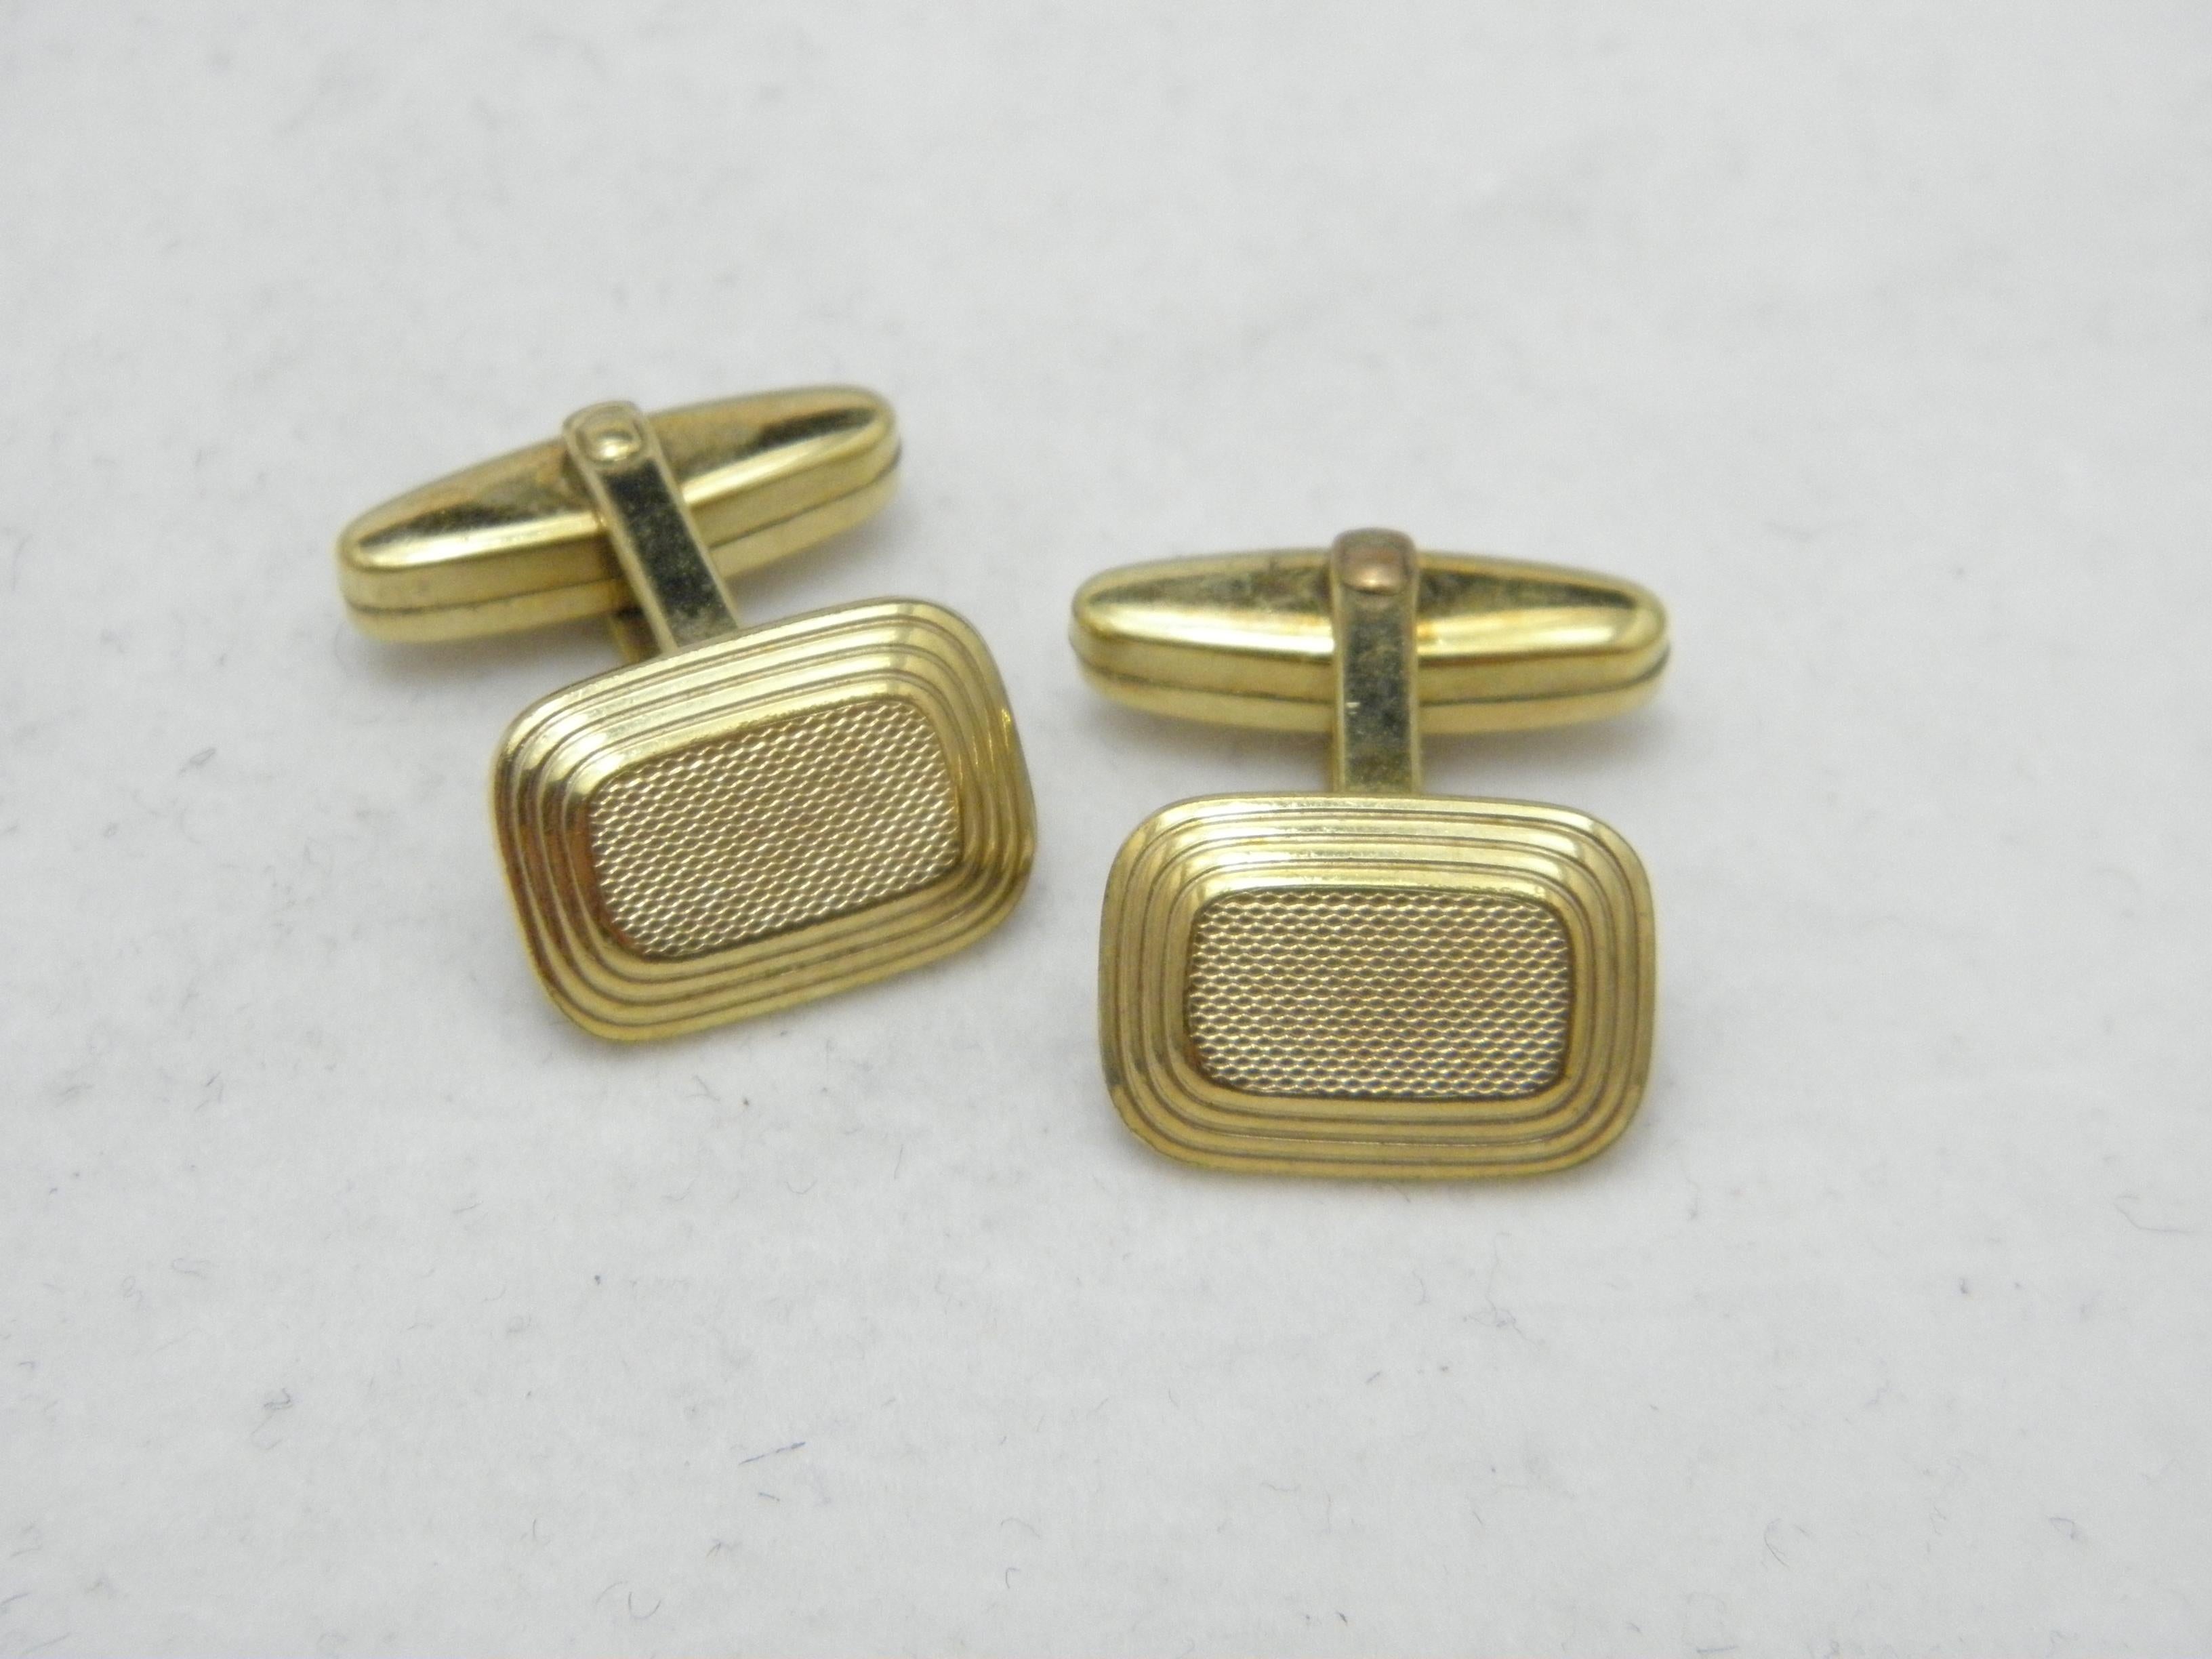 If you have landed on this page then you have an eye for beauty.

On offer is this gorgeous

8CT ANTIQUE GOLD LARGE PAIR OF ART DECO CUFFLINKS

DETAILS
Material: 8ct (333/000) Solid Yellow Gold - large and lovely design.
Style: Intricate Art Deco